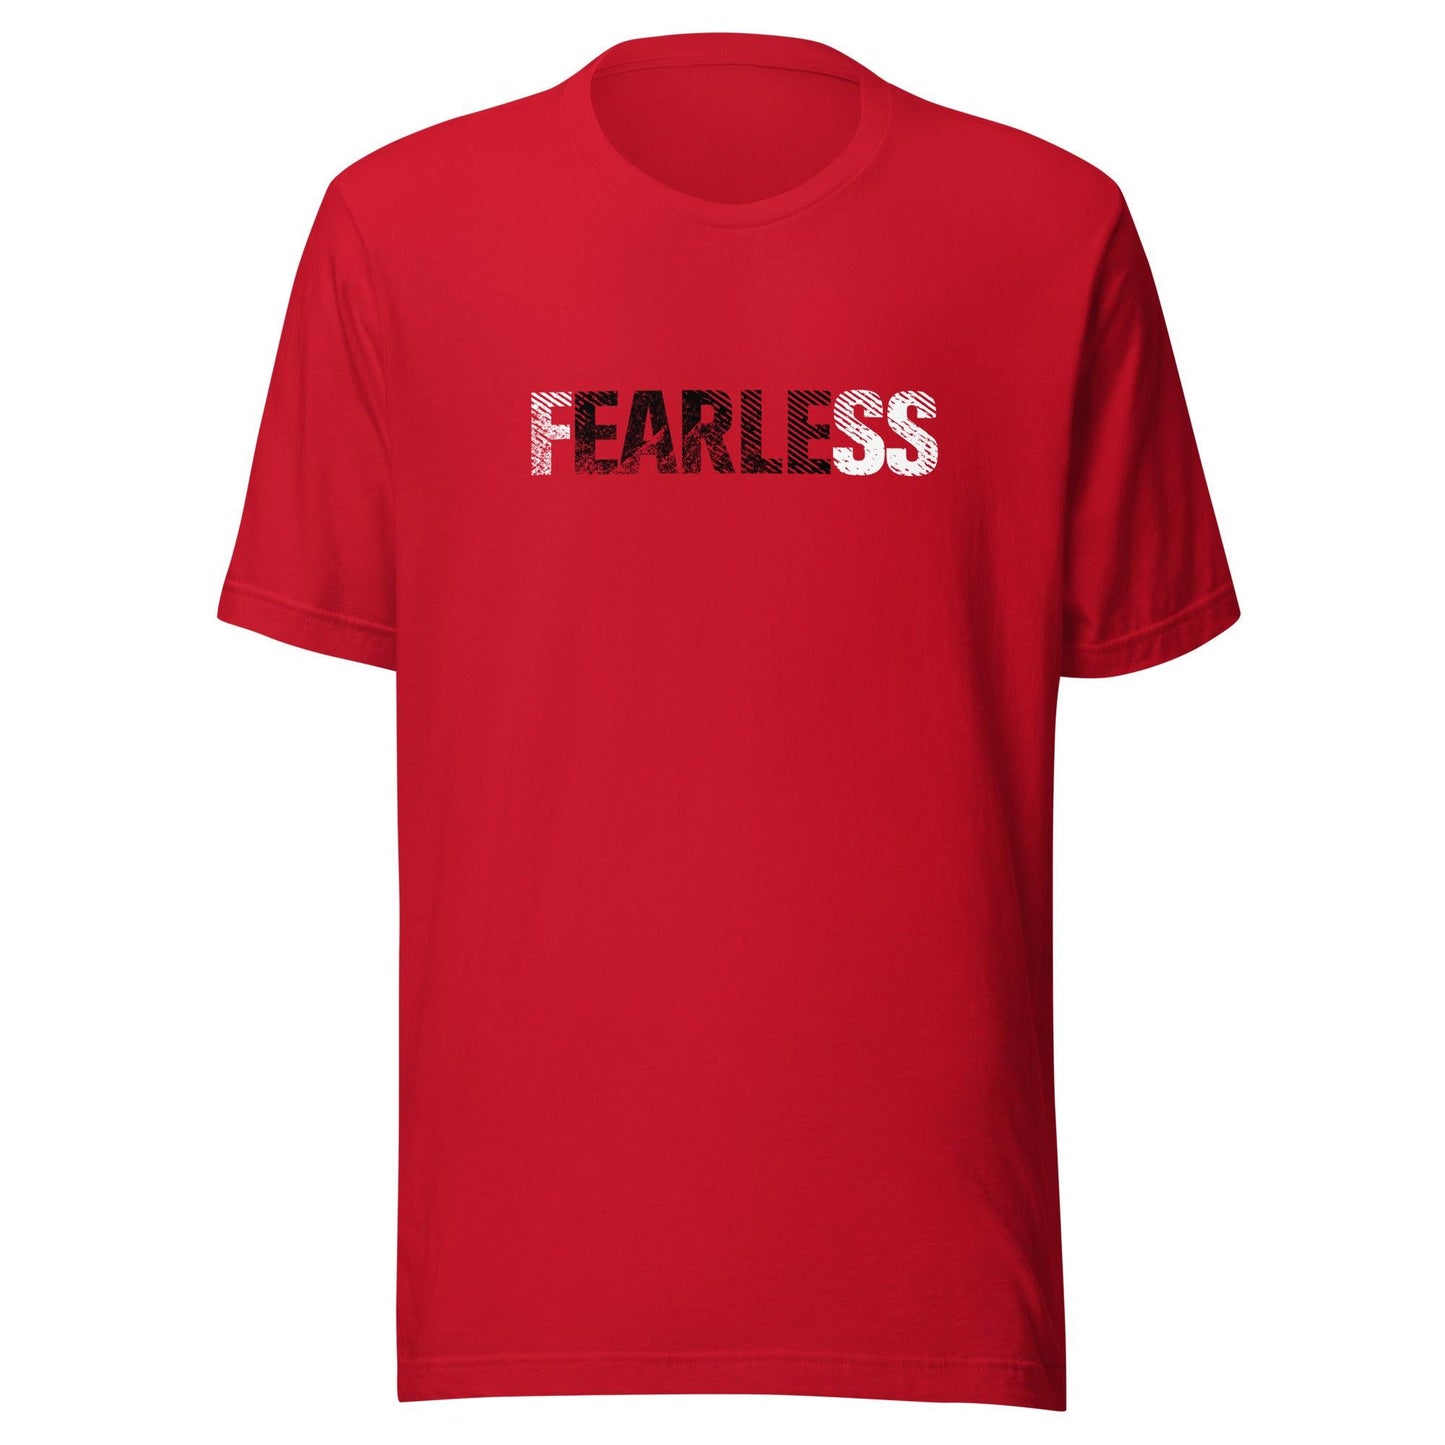 Stone Earle "FEARLESS" t-shirt